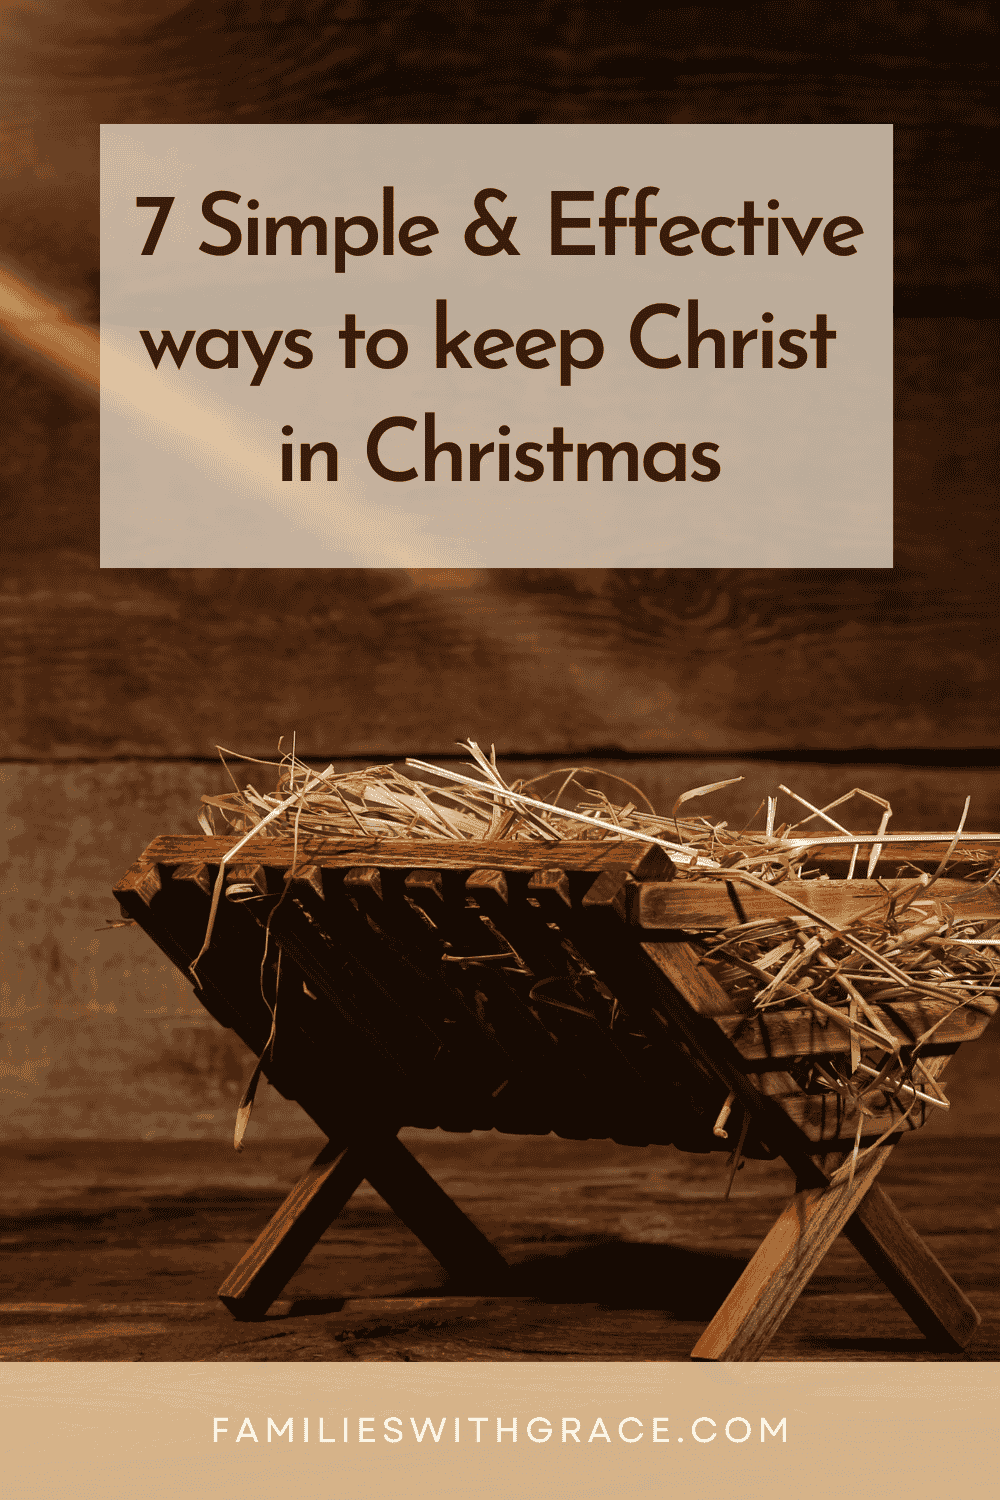 How to keep Christ in Christmas